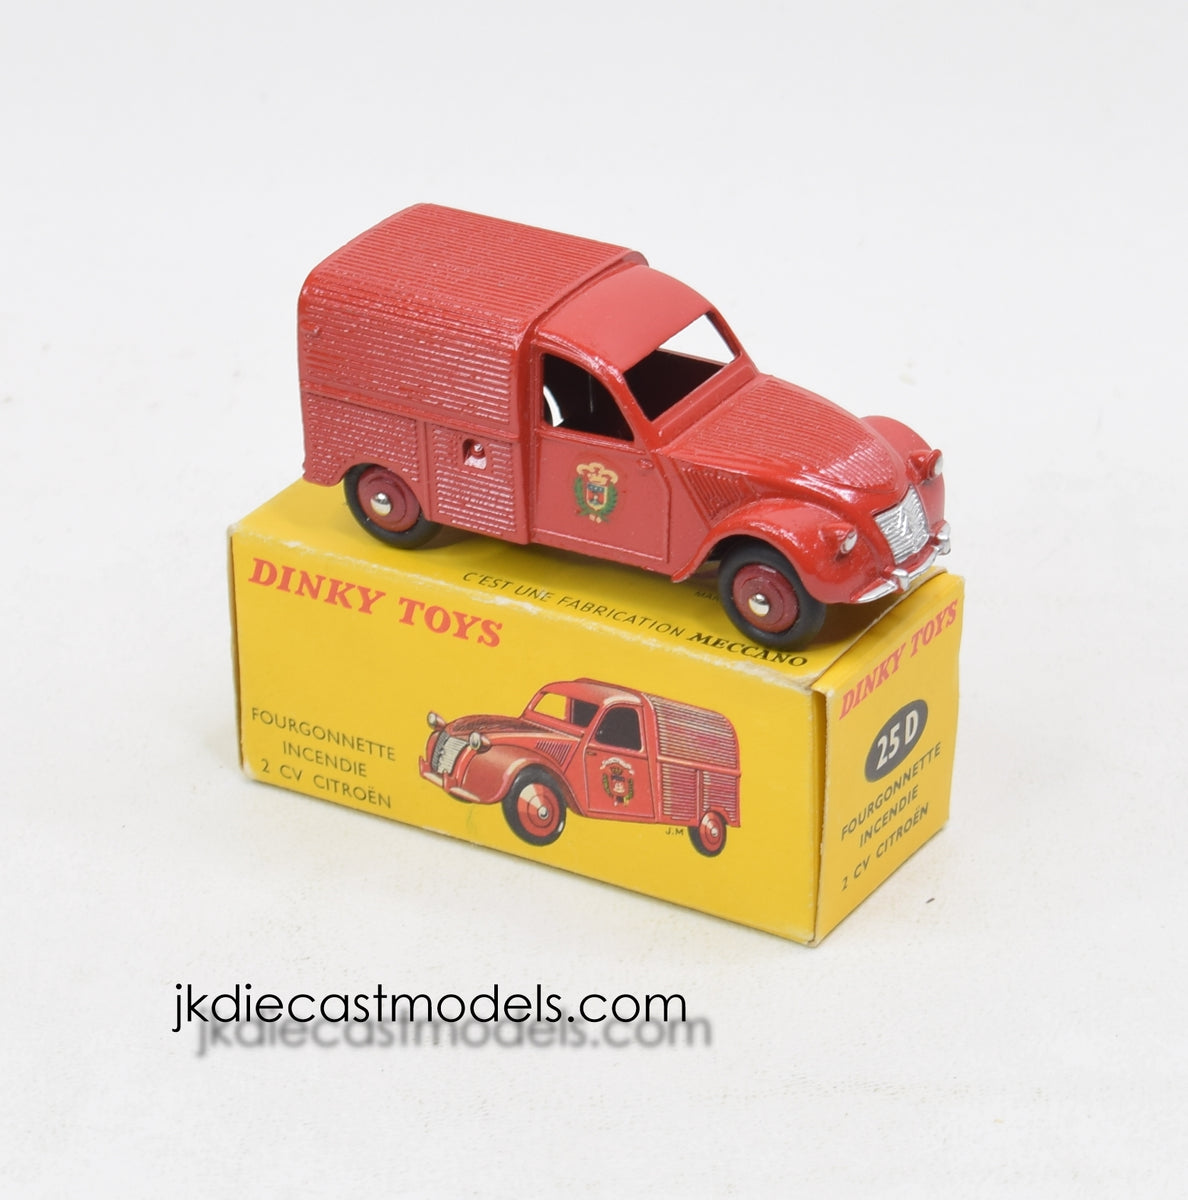 French Dinky 25d 2 cv Citroen Fourgonnette  Virtually Mint/Boxed 'Carlton' Collection